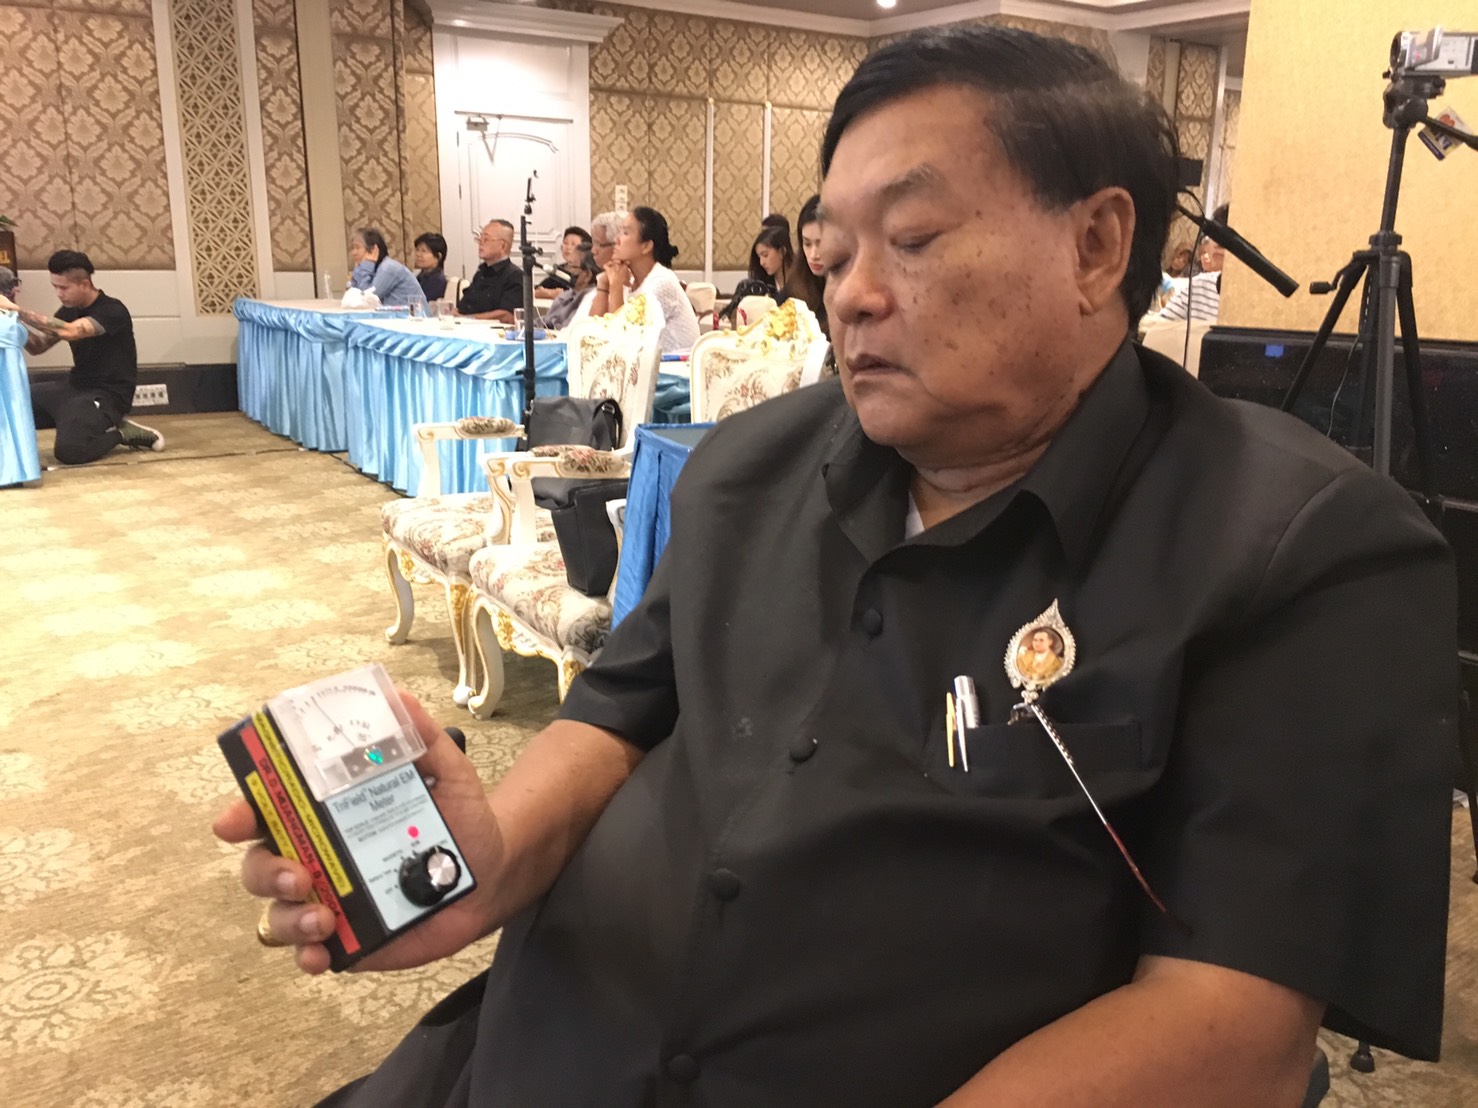 Dephanom Muangman, a Harvard-trained, former heart surgeon, demonstrates the use of his EMF meter to detect the proximity of extraterrestrials.